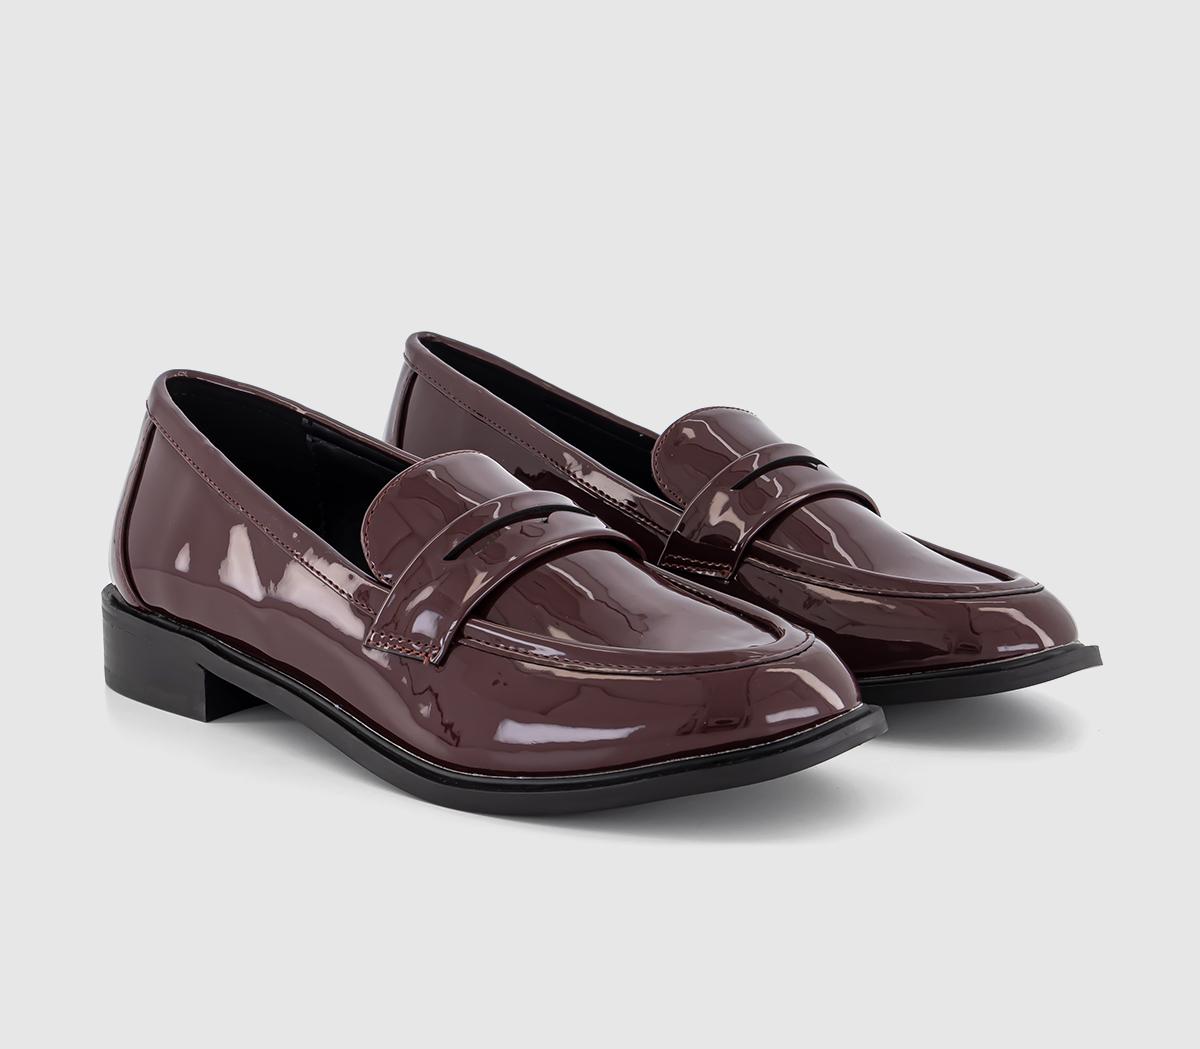 OFFICE Flaming Penny Loafers Burgundy Patent Purple, 3